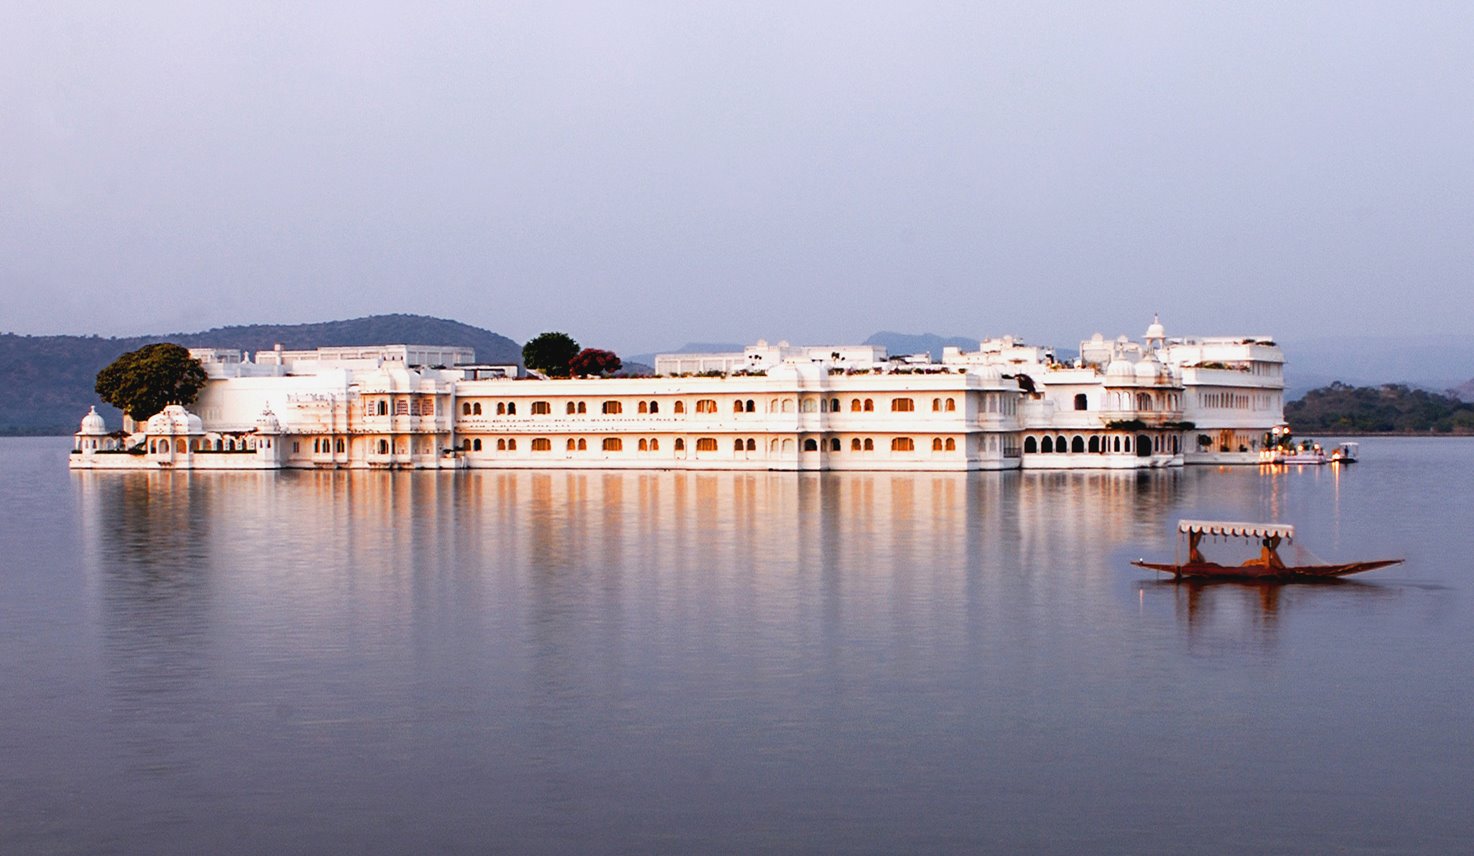 Discover India: Udaipur City Palace - An Architectural Wonder